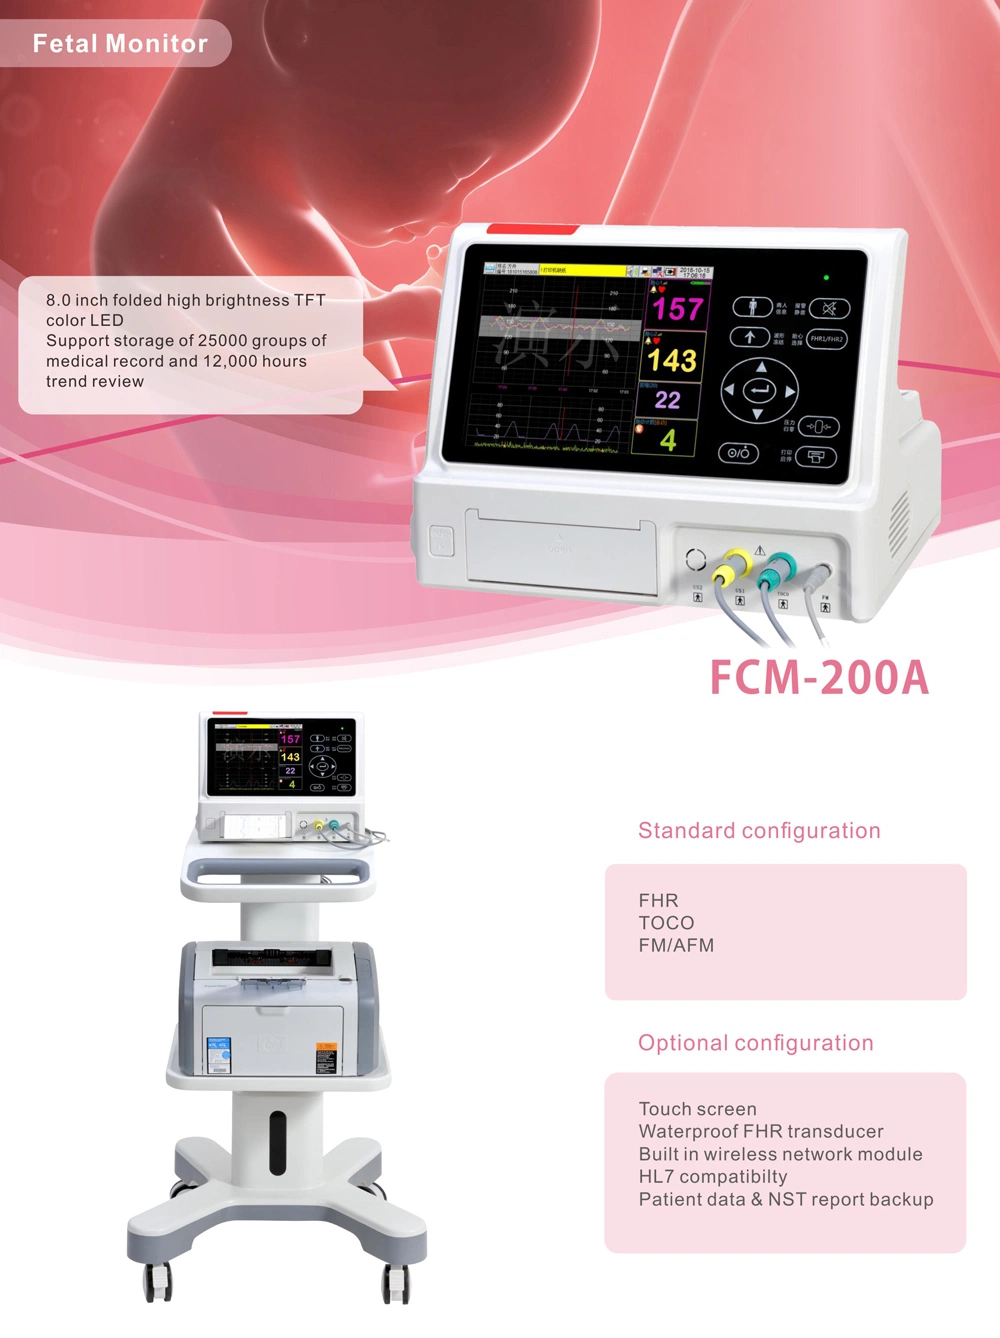 Portable Ctg Machine Fetal Monitor with Printer and Large Screen